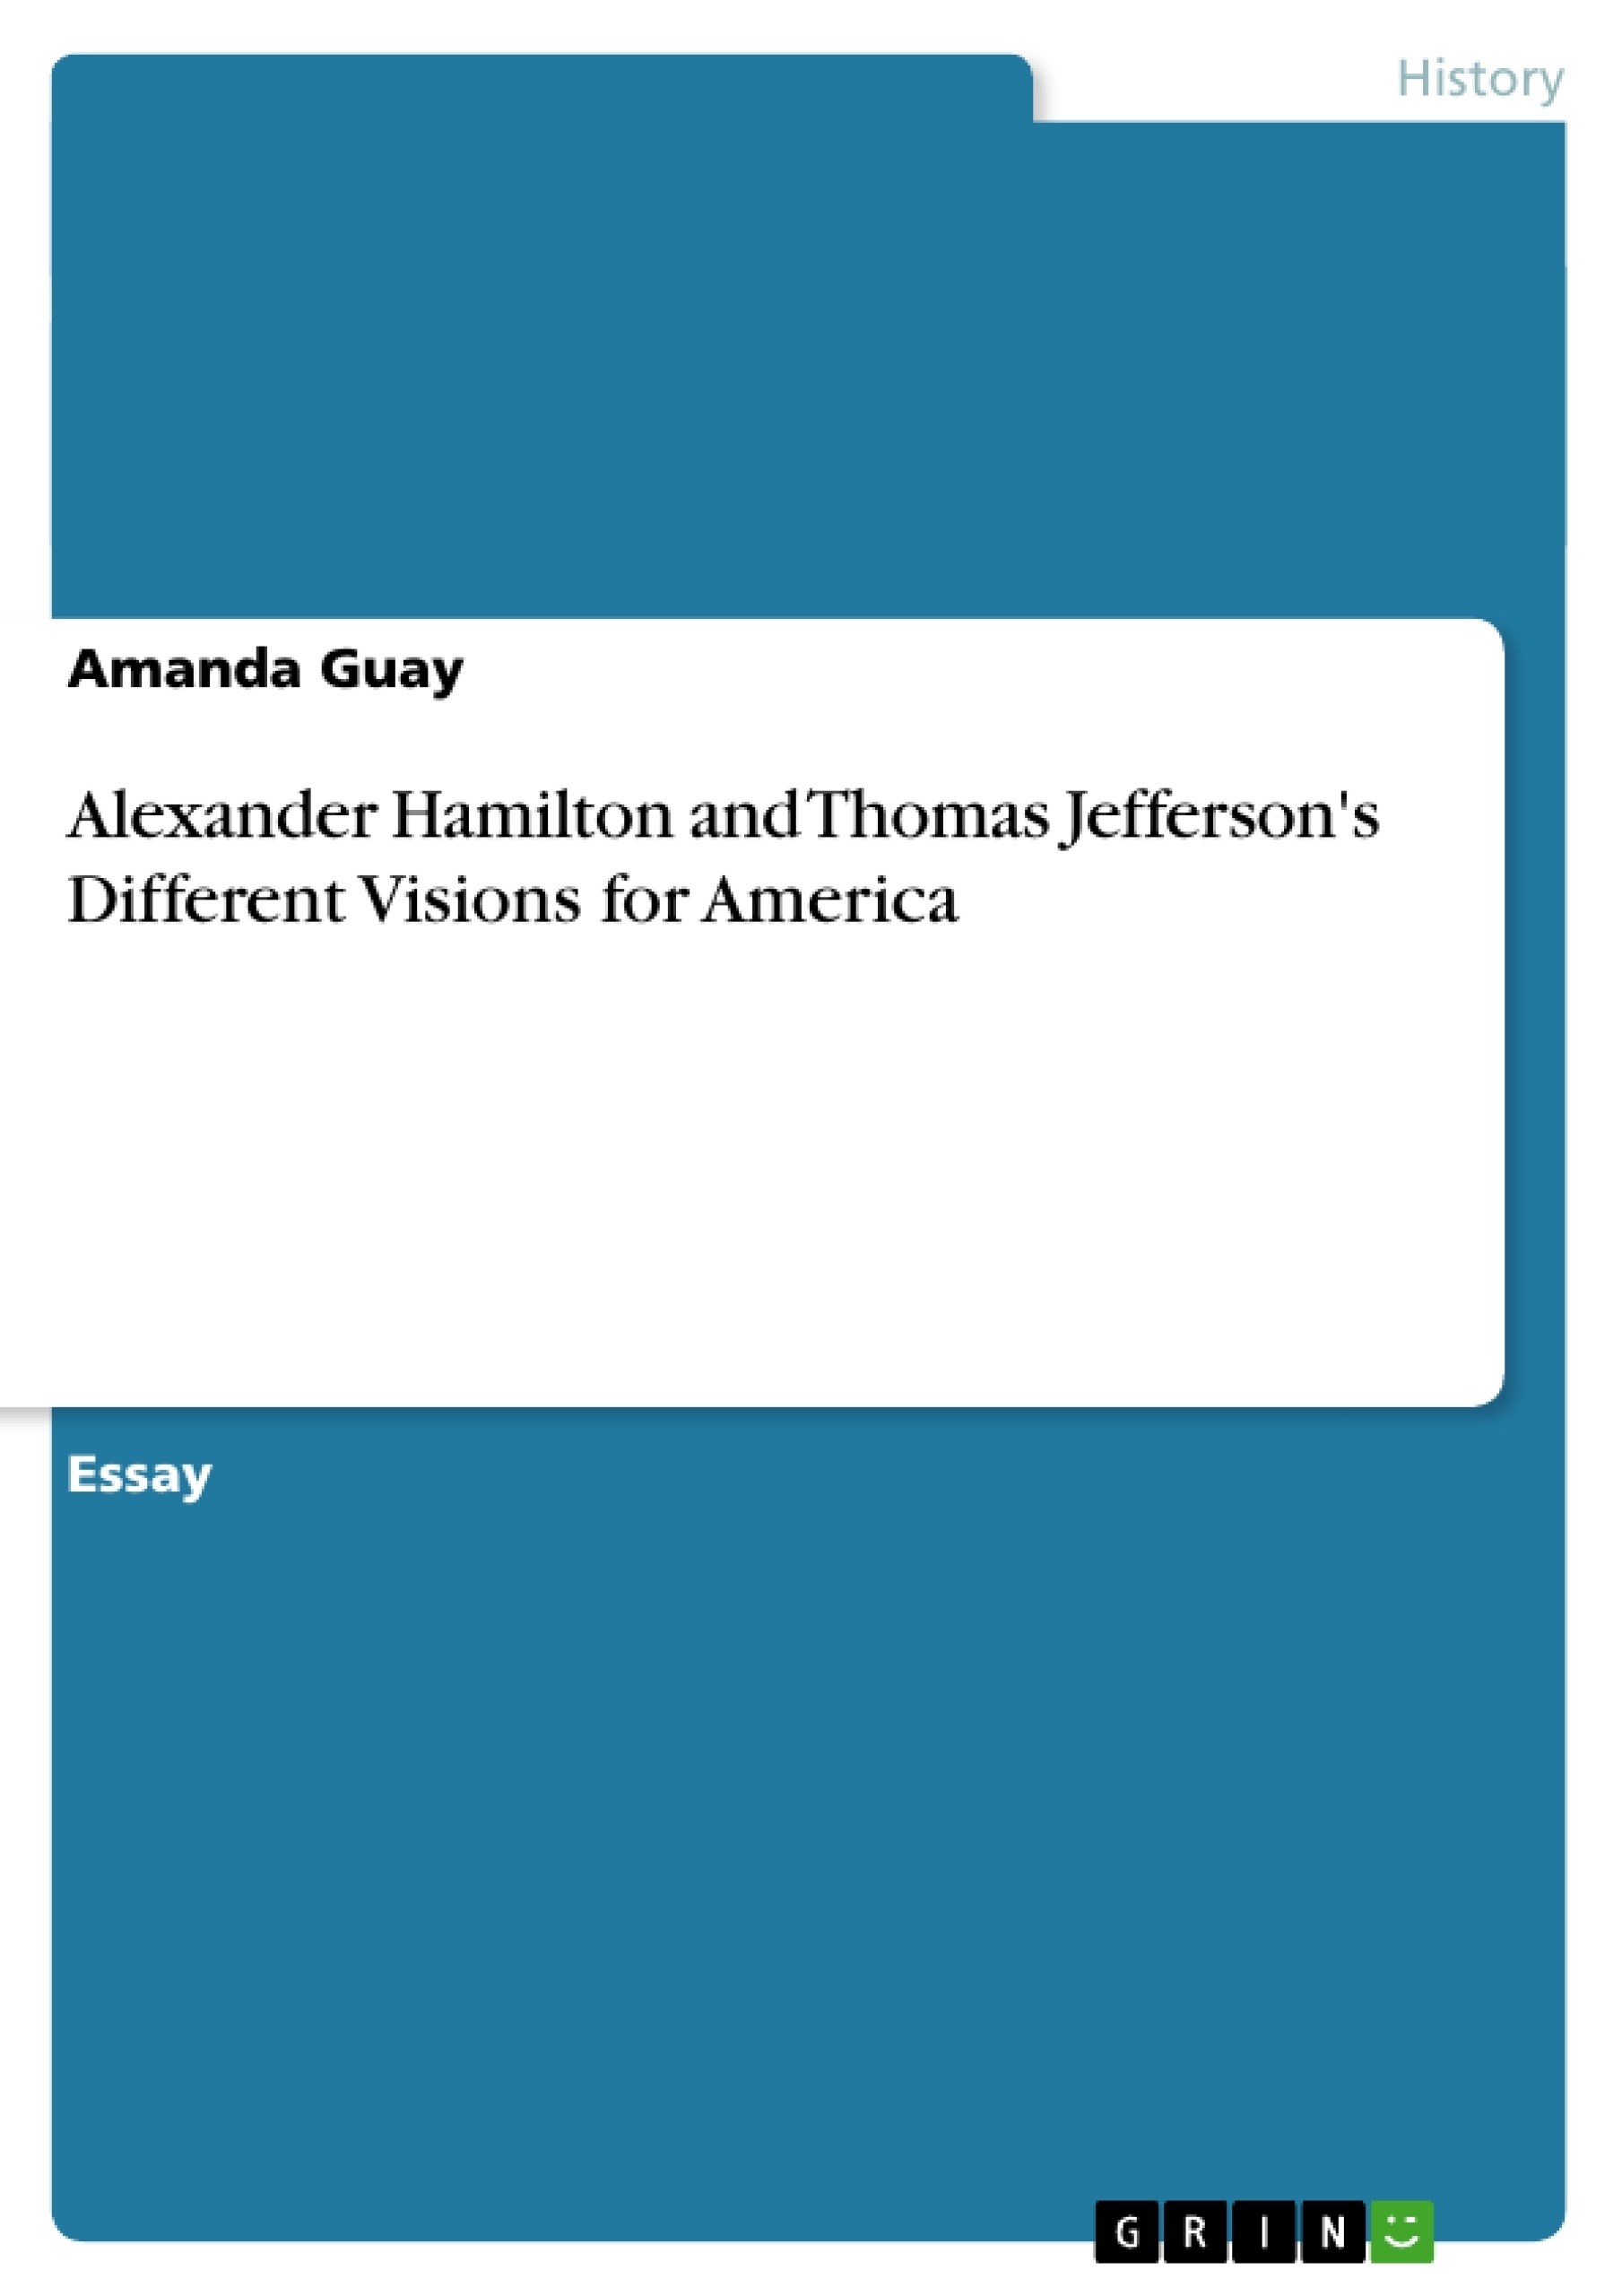 Title: Alexander Hamilton and Thomas Jefferson's Different Visions for America